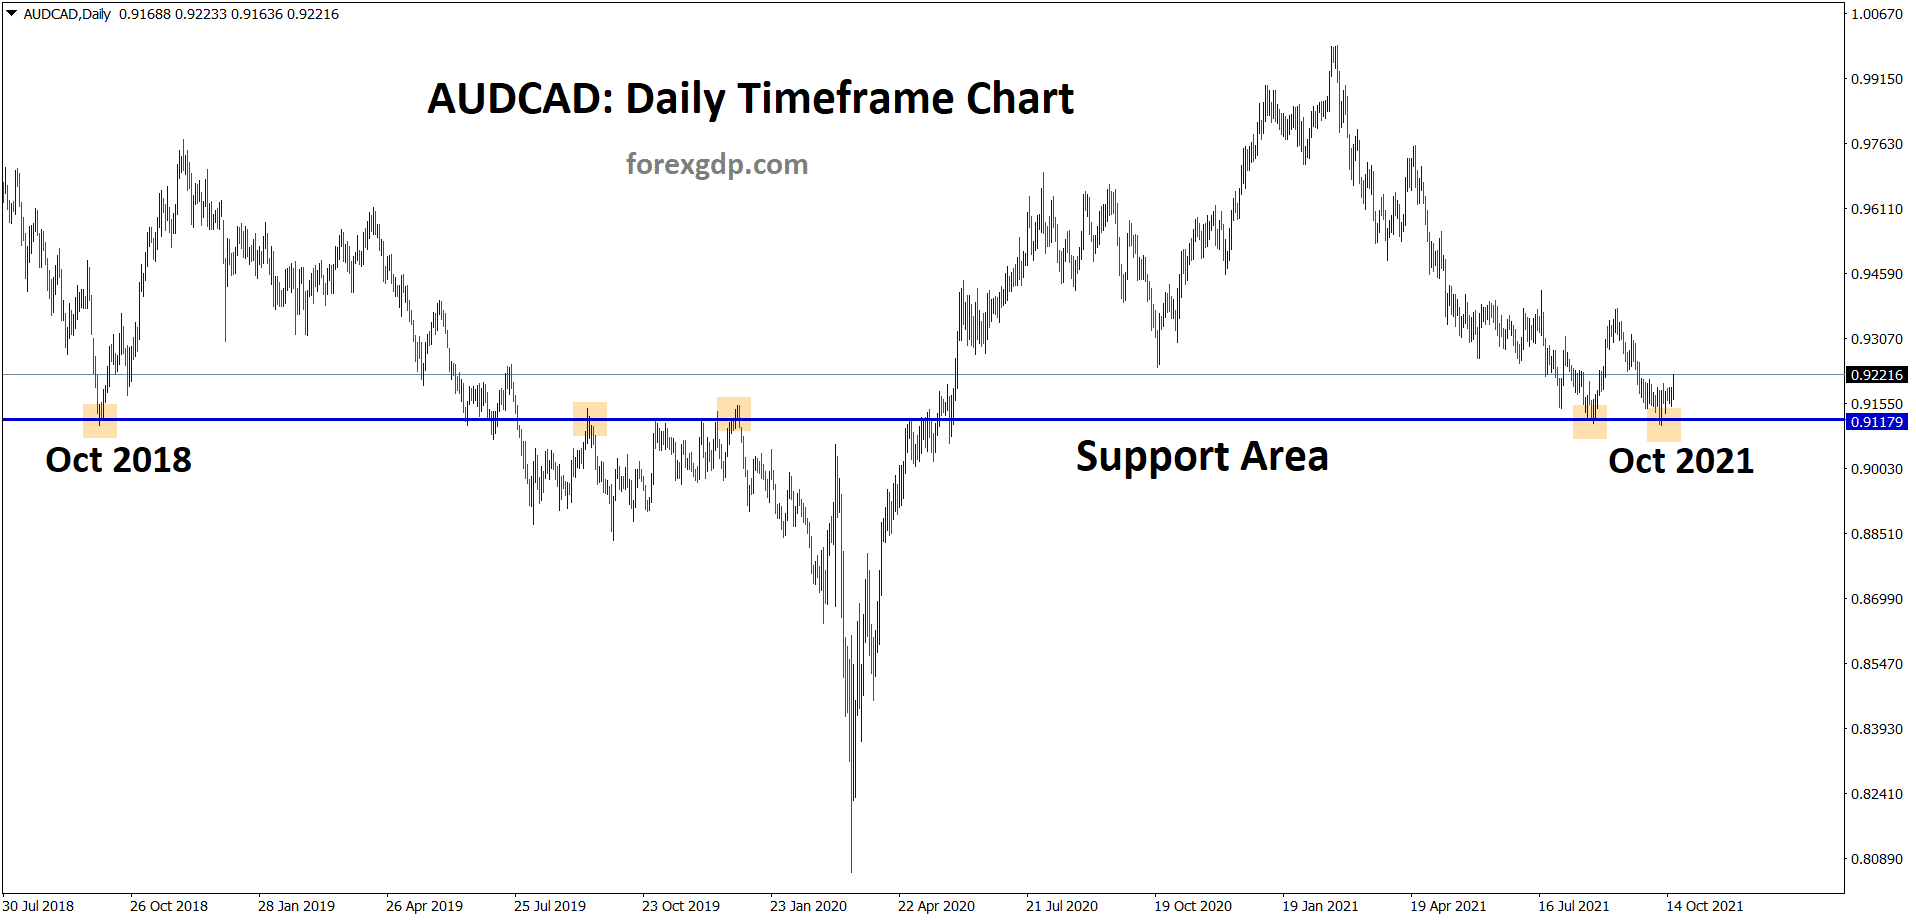 AUDCAD is rebounding from the major support zone in the daily timeframe